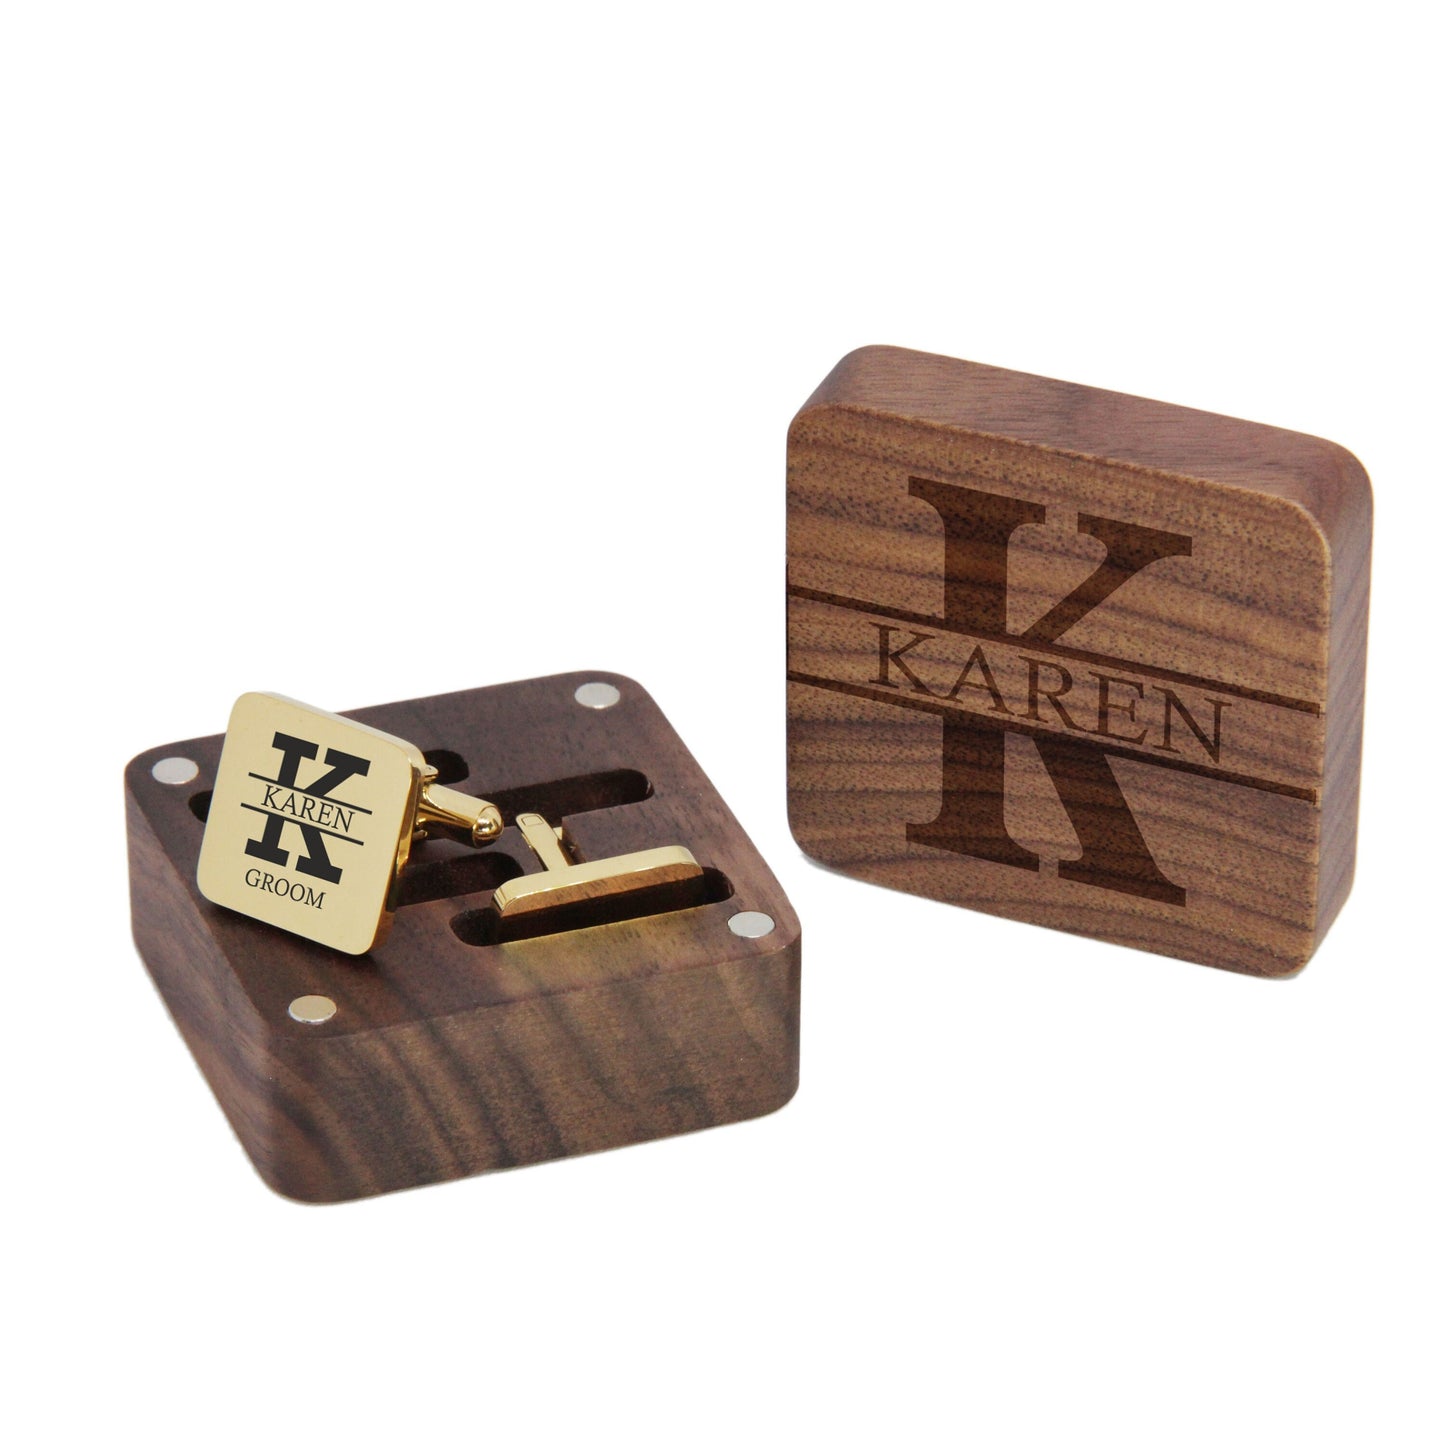 Personalised engraved stainless steel mens square cufflinks gift with wooden box | father husband groom groomsman best man wedding gift